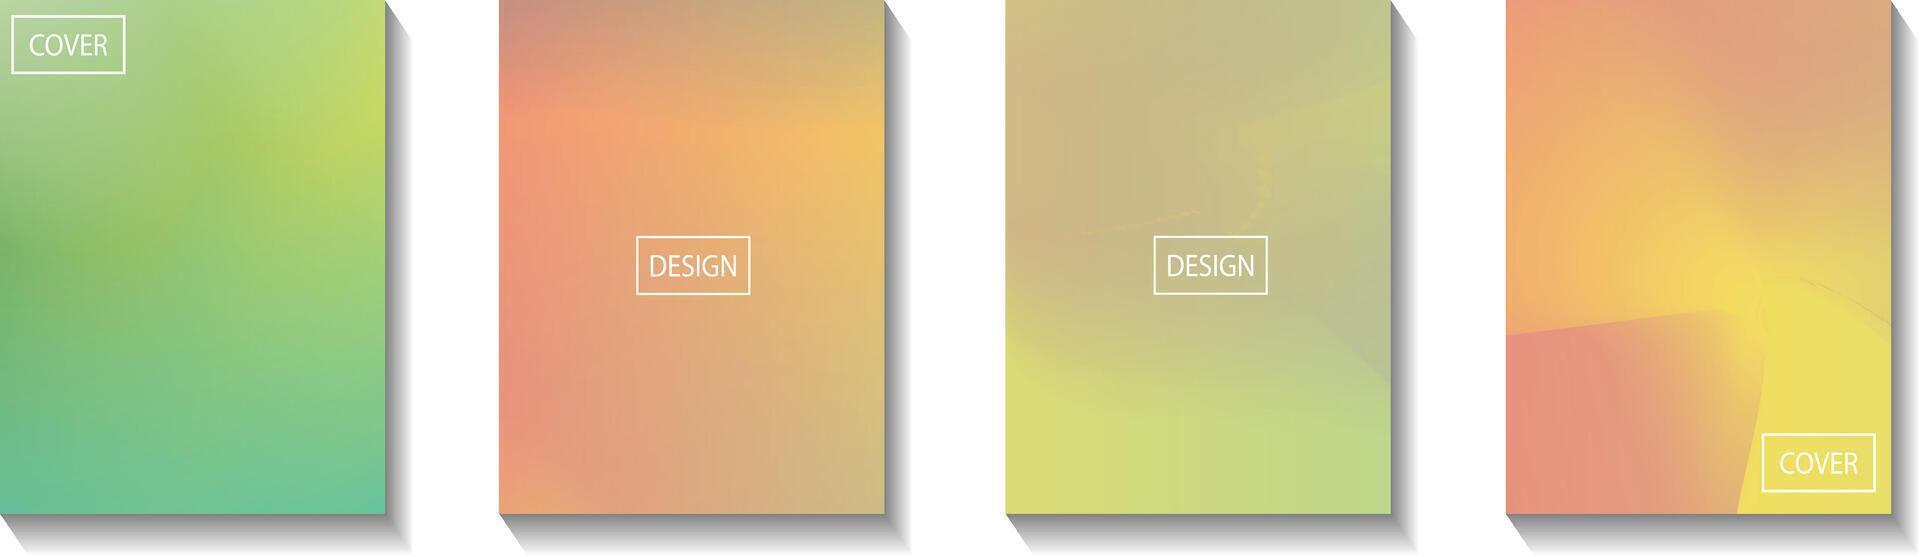 collection of colorful gradient background cover flyers are used for backgrounds, posters, banners, etc. vector